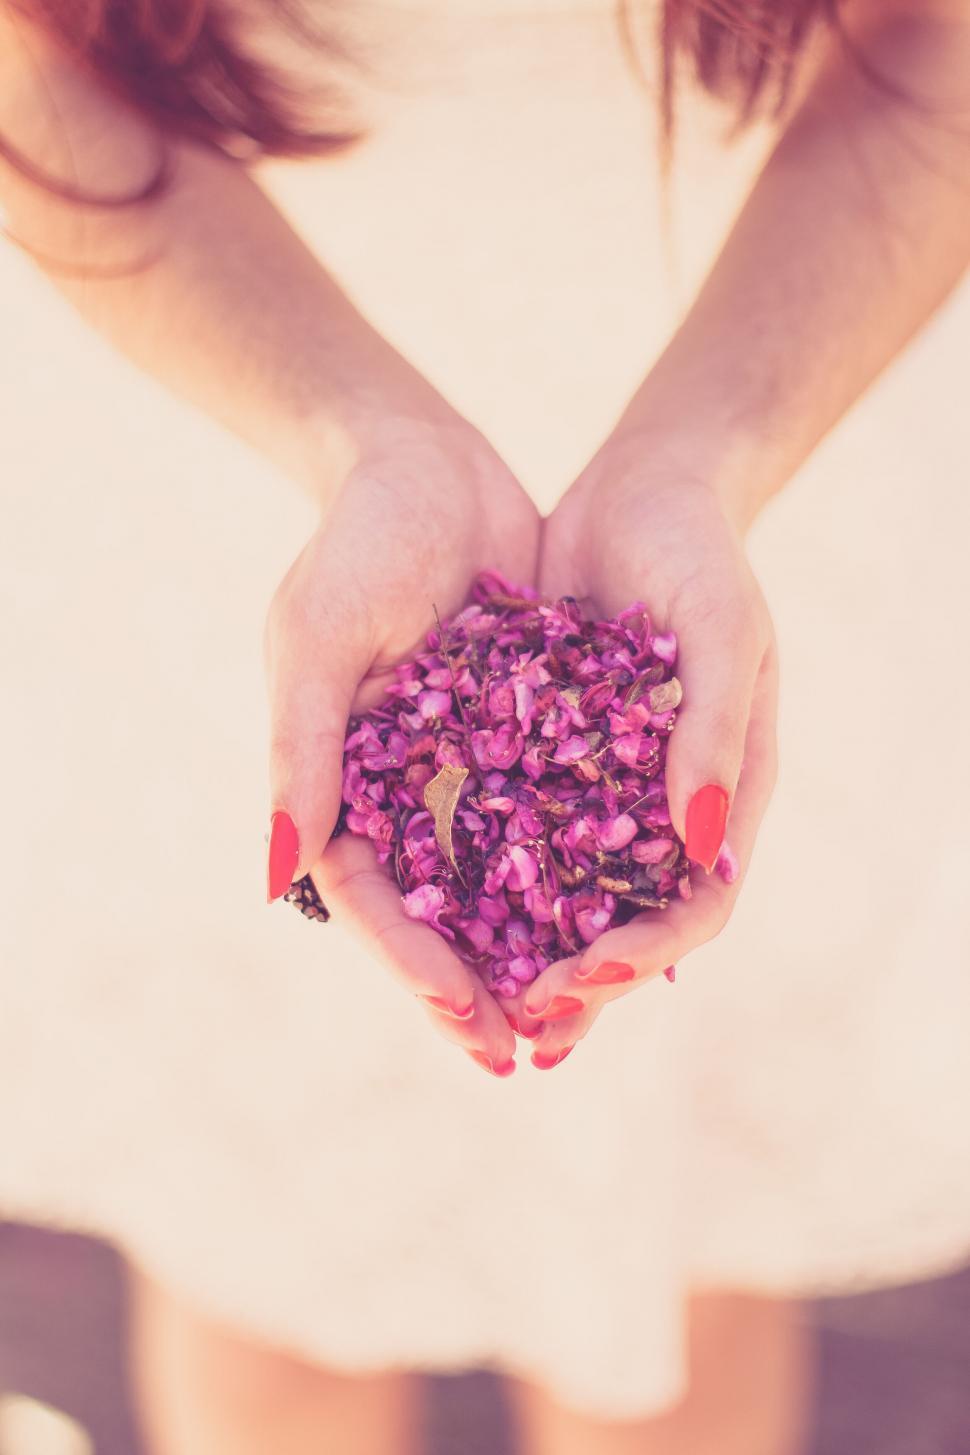 Free Image of A person holding a handful of flowers 